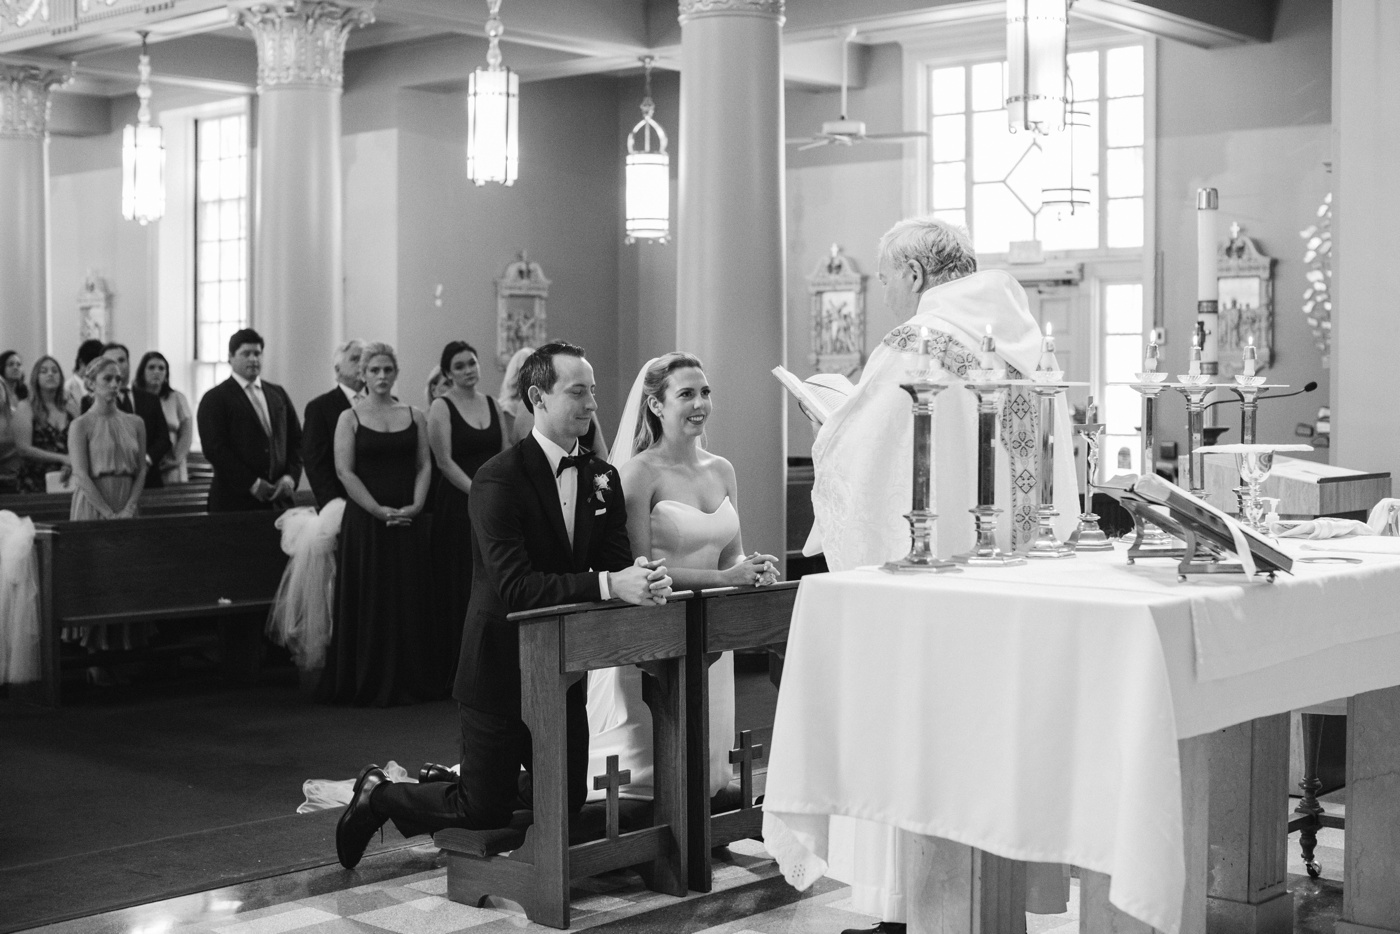 Wedding ceremony at St. Mary of the Nativity Church in Scituate, MA